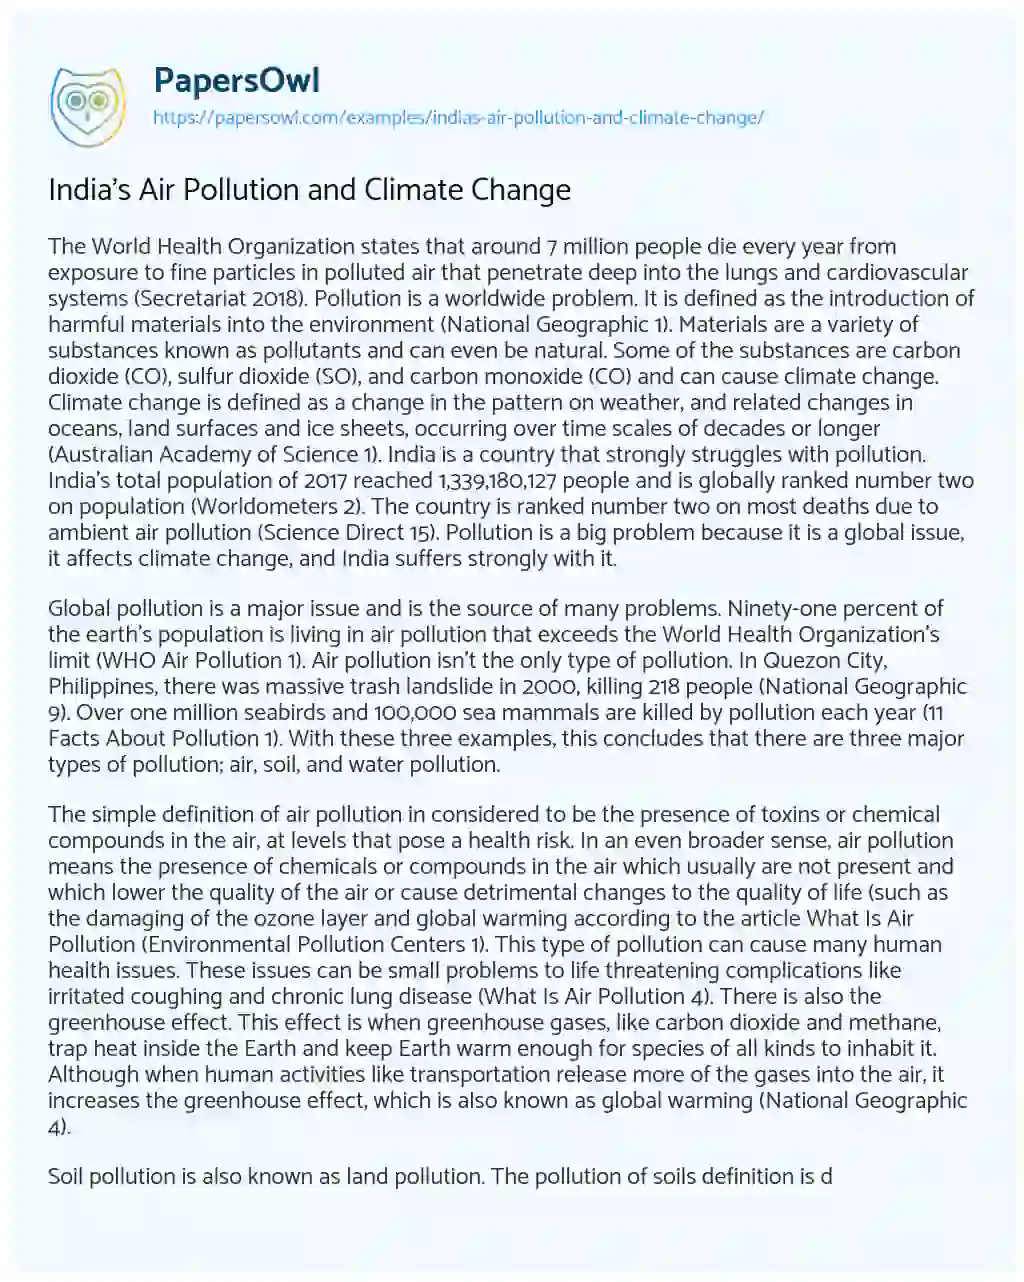 Essay on India’s Air Pollution and Climate Change